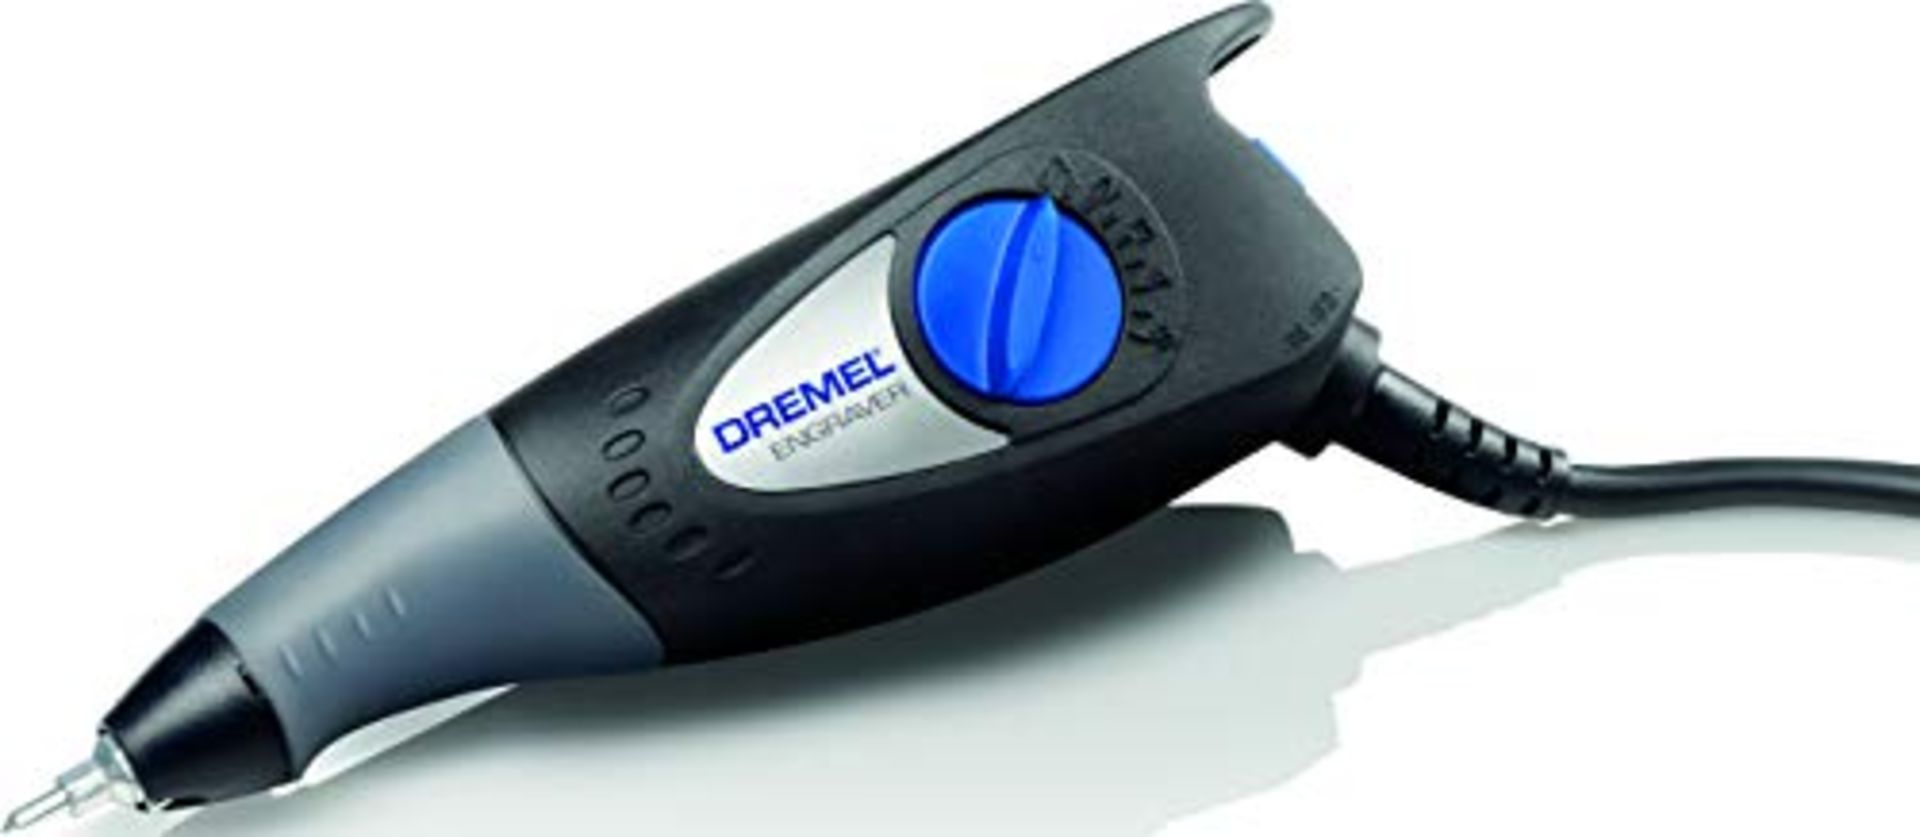 Dremel 290 Engraver - Compact Engraving Pen Tool with 3 Engraving Tips and 4 Craft Ste